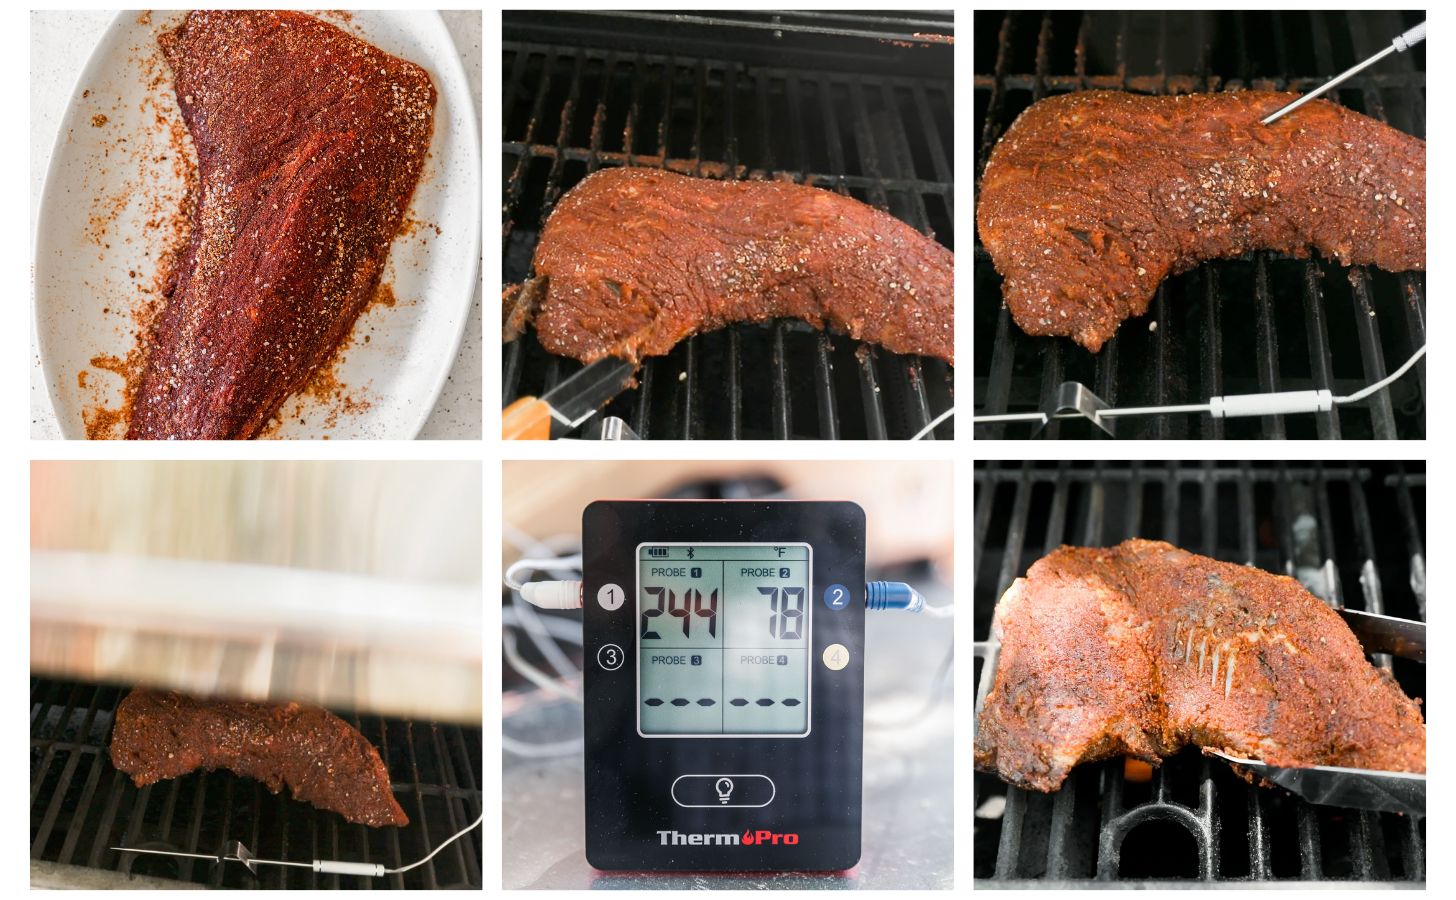 Six steps to smoking tri-tip on the grill. In photo 1, a white tray of seasoned tri-tip on a white counter. In photo 2, tongs place tri-tip on a grill. In photo 3, a hand inserts a thermometer into the tri-tip. In photo 4, a hand closes the lid of the grill. In photo 5, a temperature gauge on a grill. In photo 6, tongs sear tri-tip on a grill.